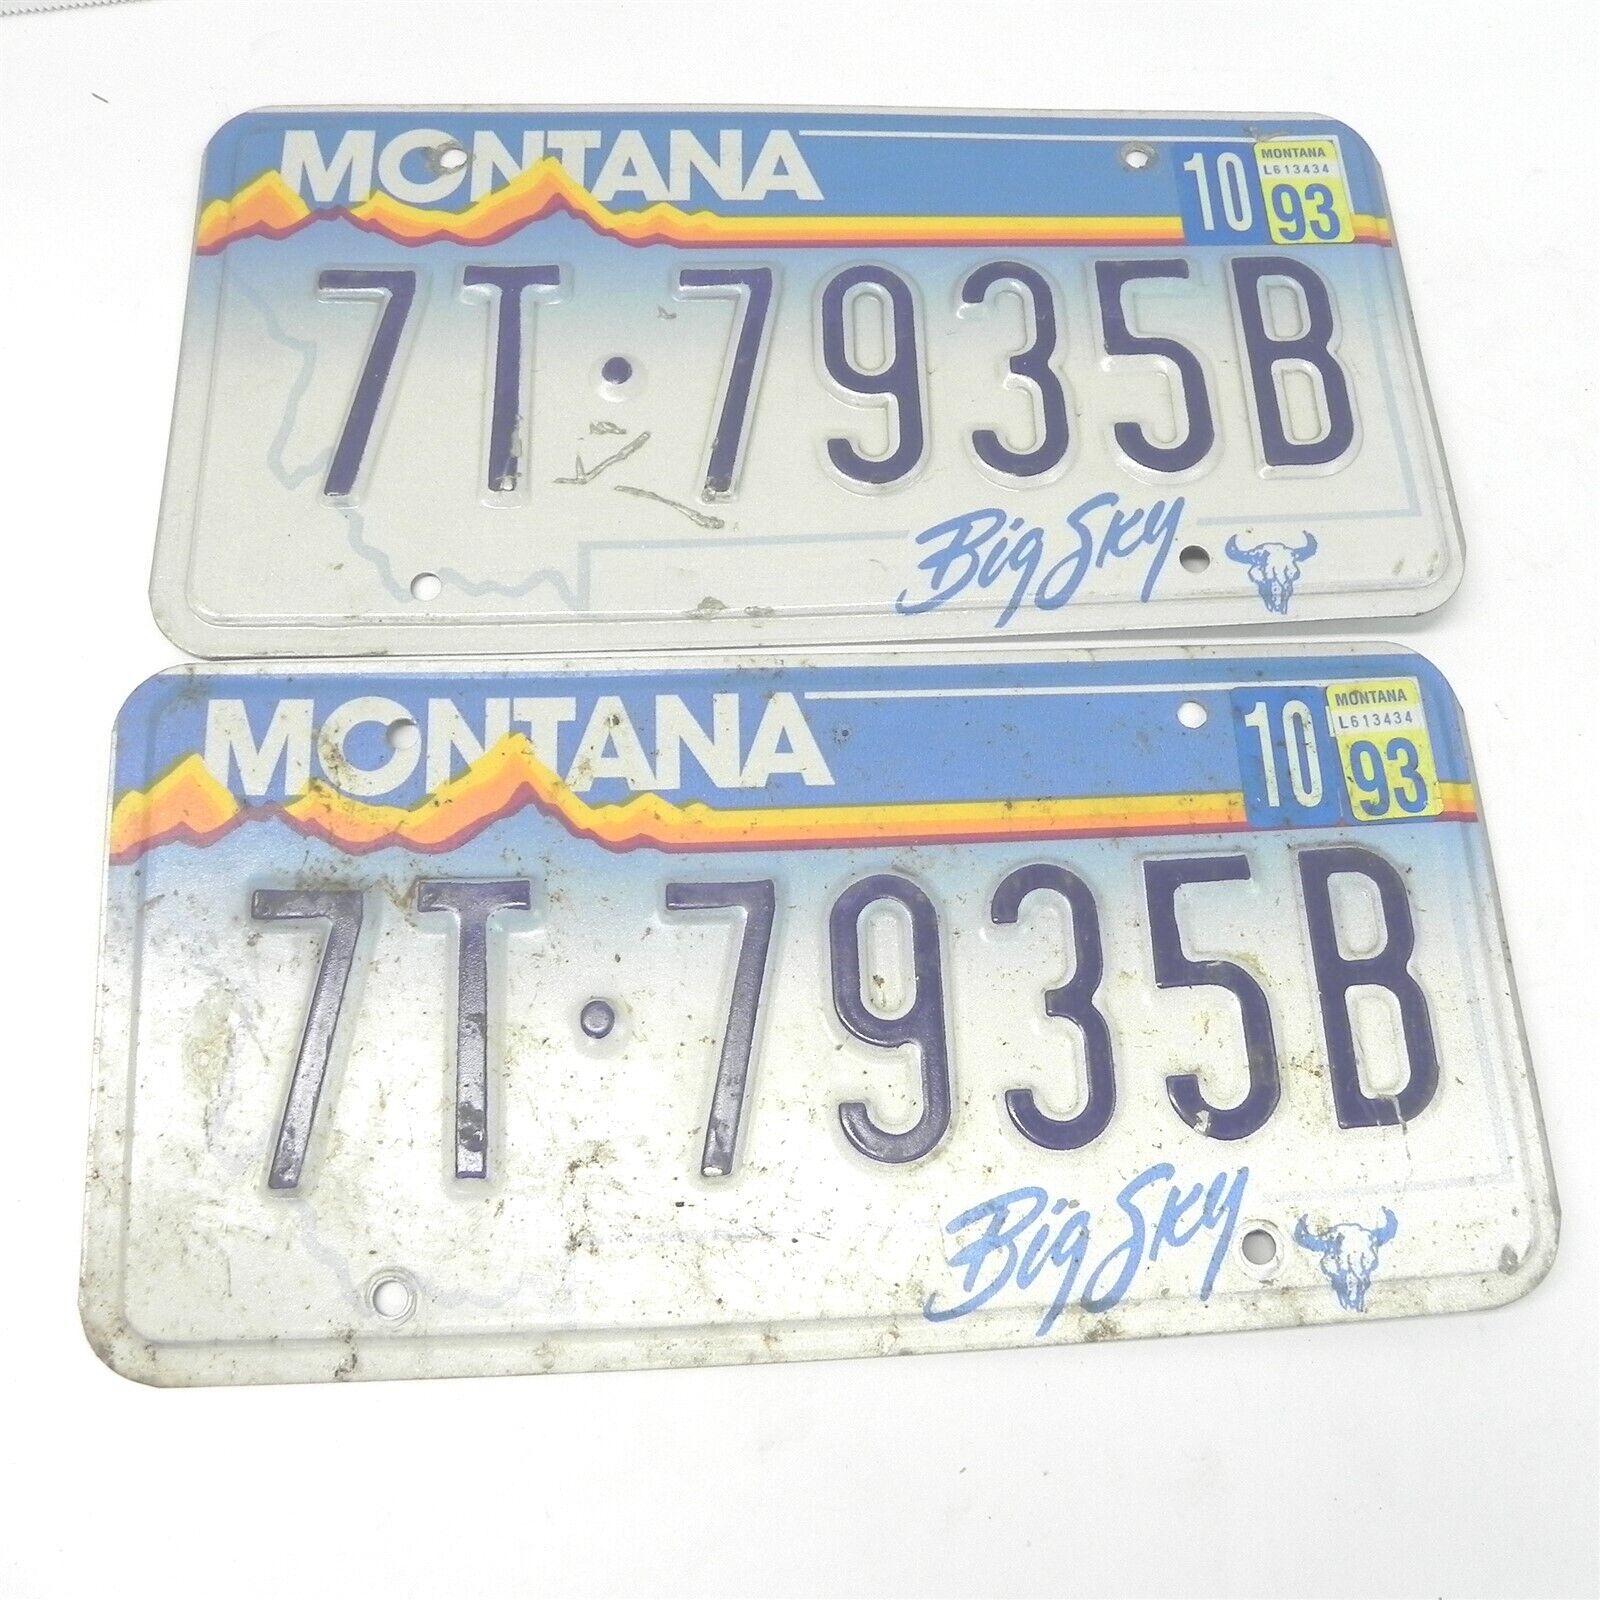 VINTAGE MONTANA BIG SKY LICENSE PLATE SET 7T7935B COLLECTIBLE WHITE AND BLUE 